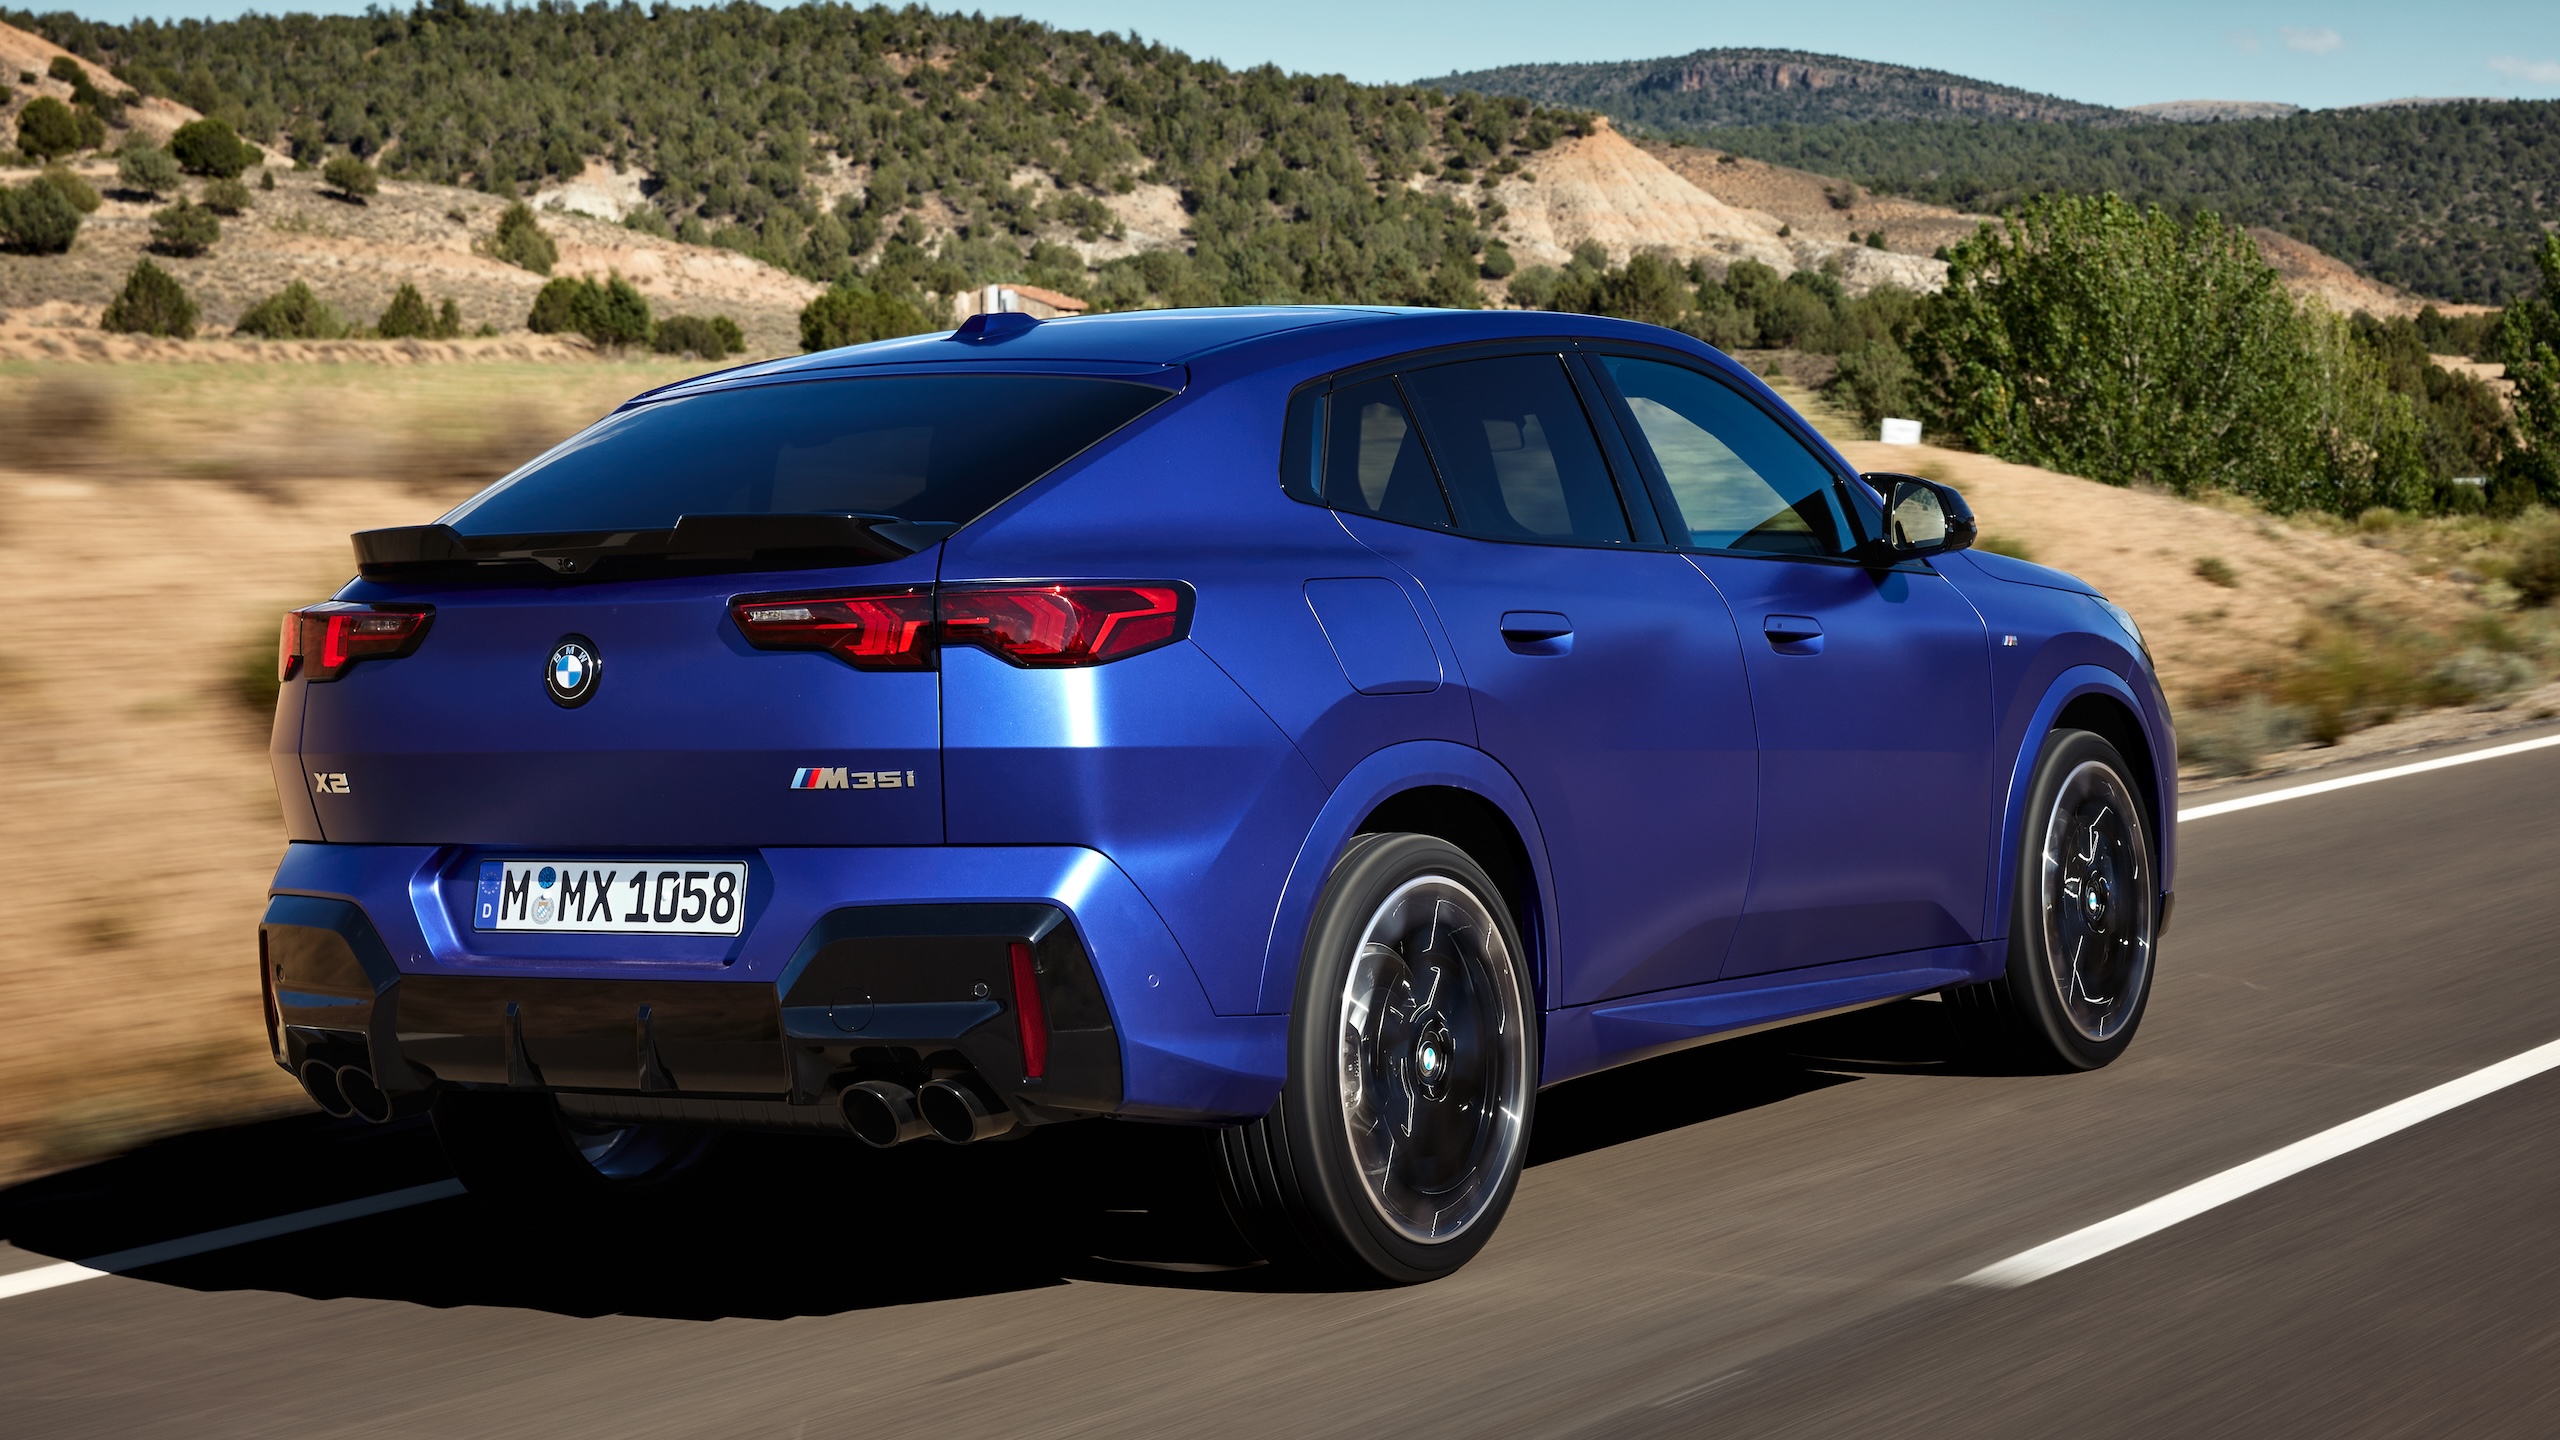 The base model of the BMW X2 in 2024 will be upgraded with 21-inch wheels and a powerful 312 horsepower engine.